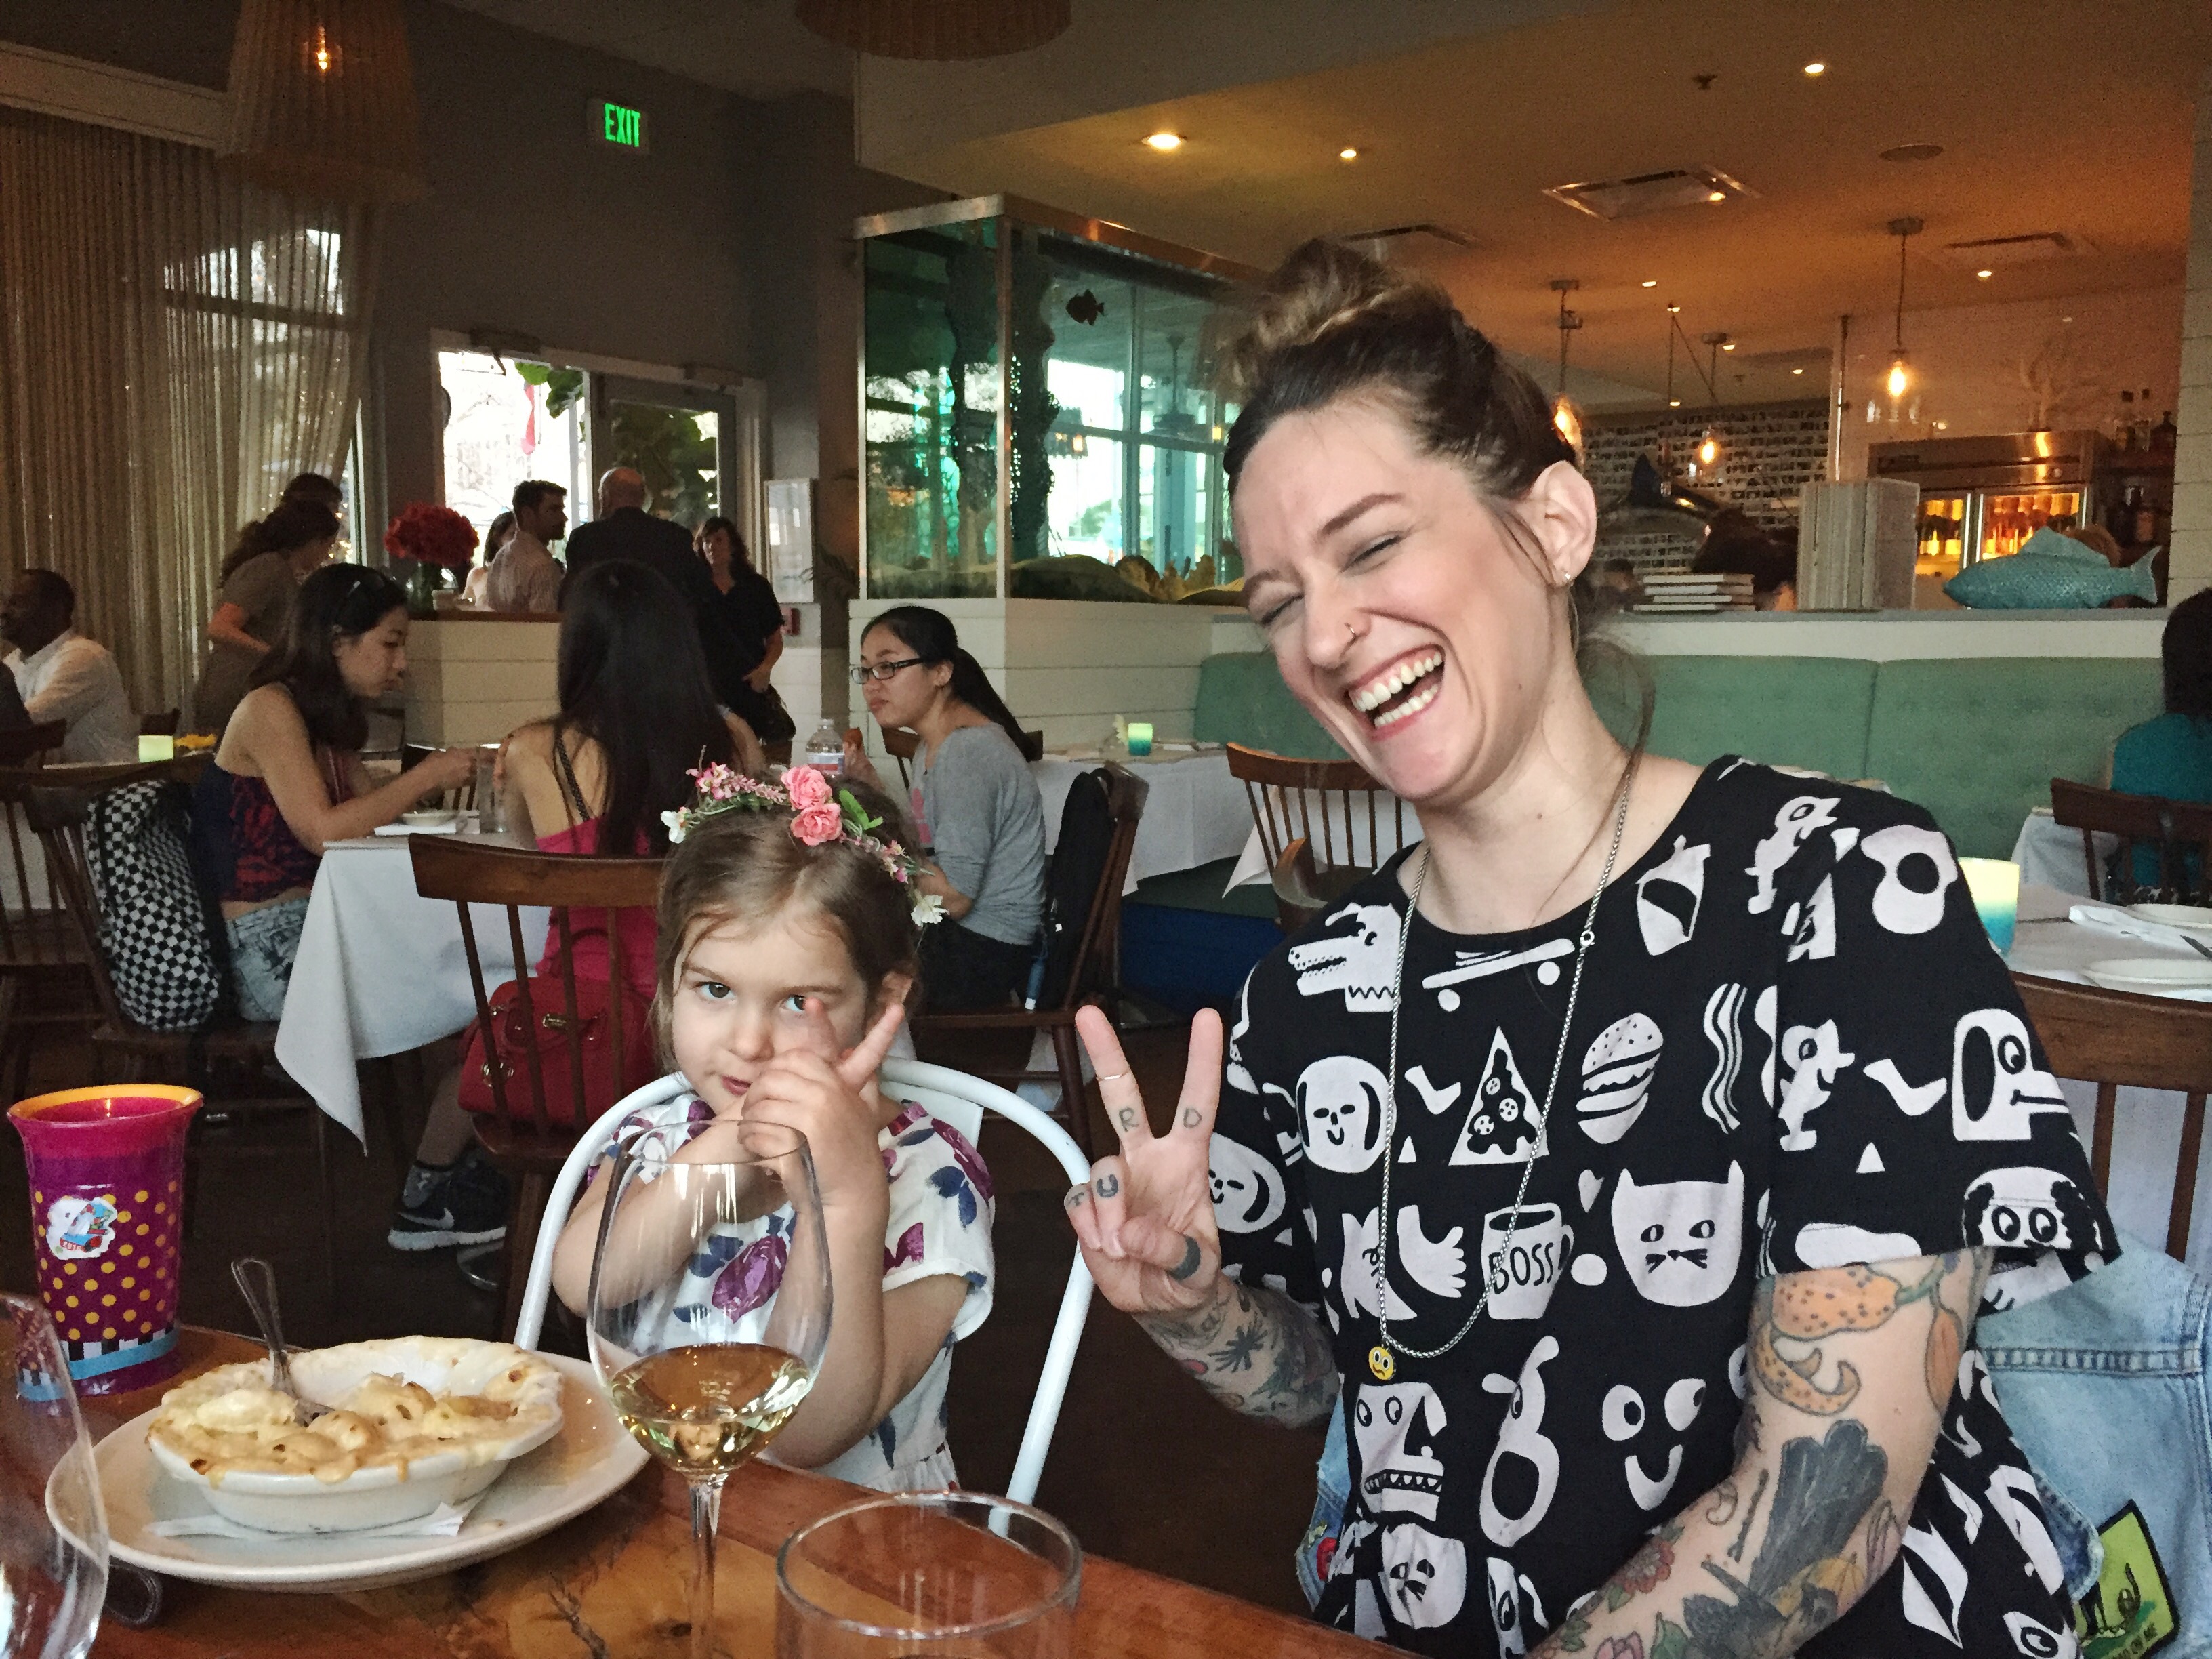 a mom and her daughter sitting at a table showing peace signs with their hands